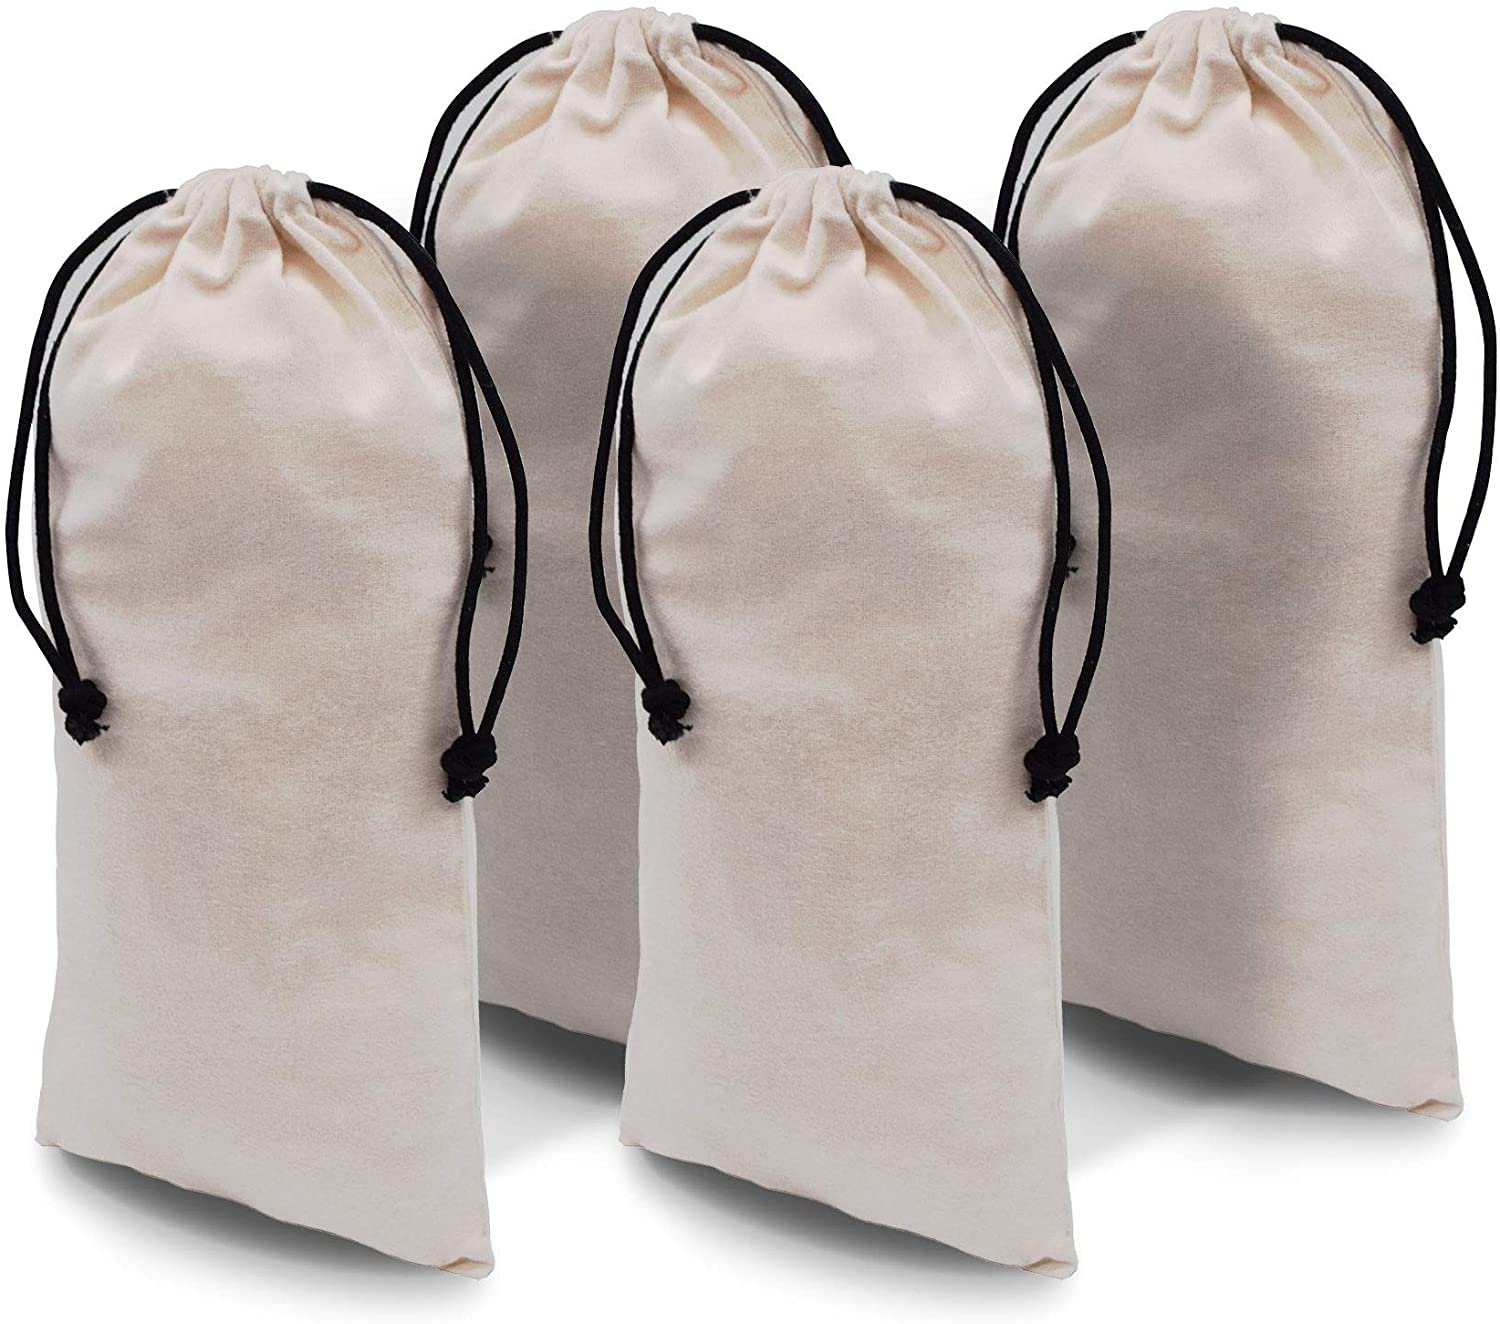 Shoe Dust Bags - 4 Pack Beige Duster Flannel Single Shoe Pouch with Drawstring Closure, Washable Breathable Cotton Fabric Cloth for Travel, Home, Luggage, Handbags, Storage, Accessories - 8x17